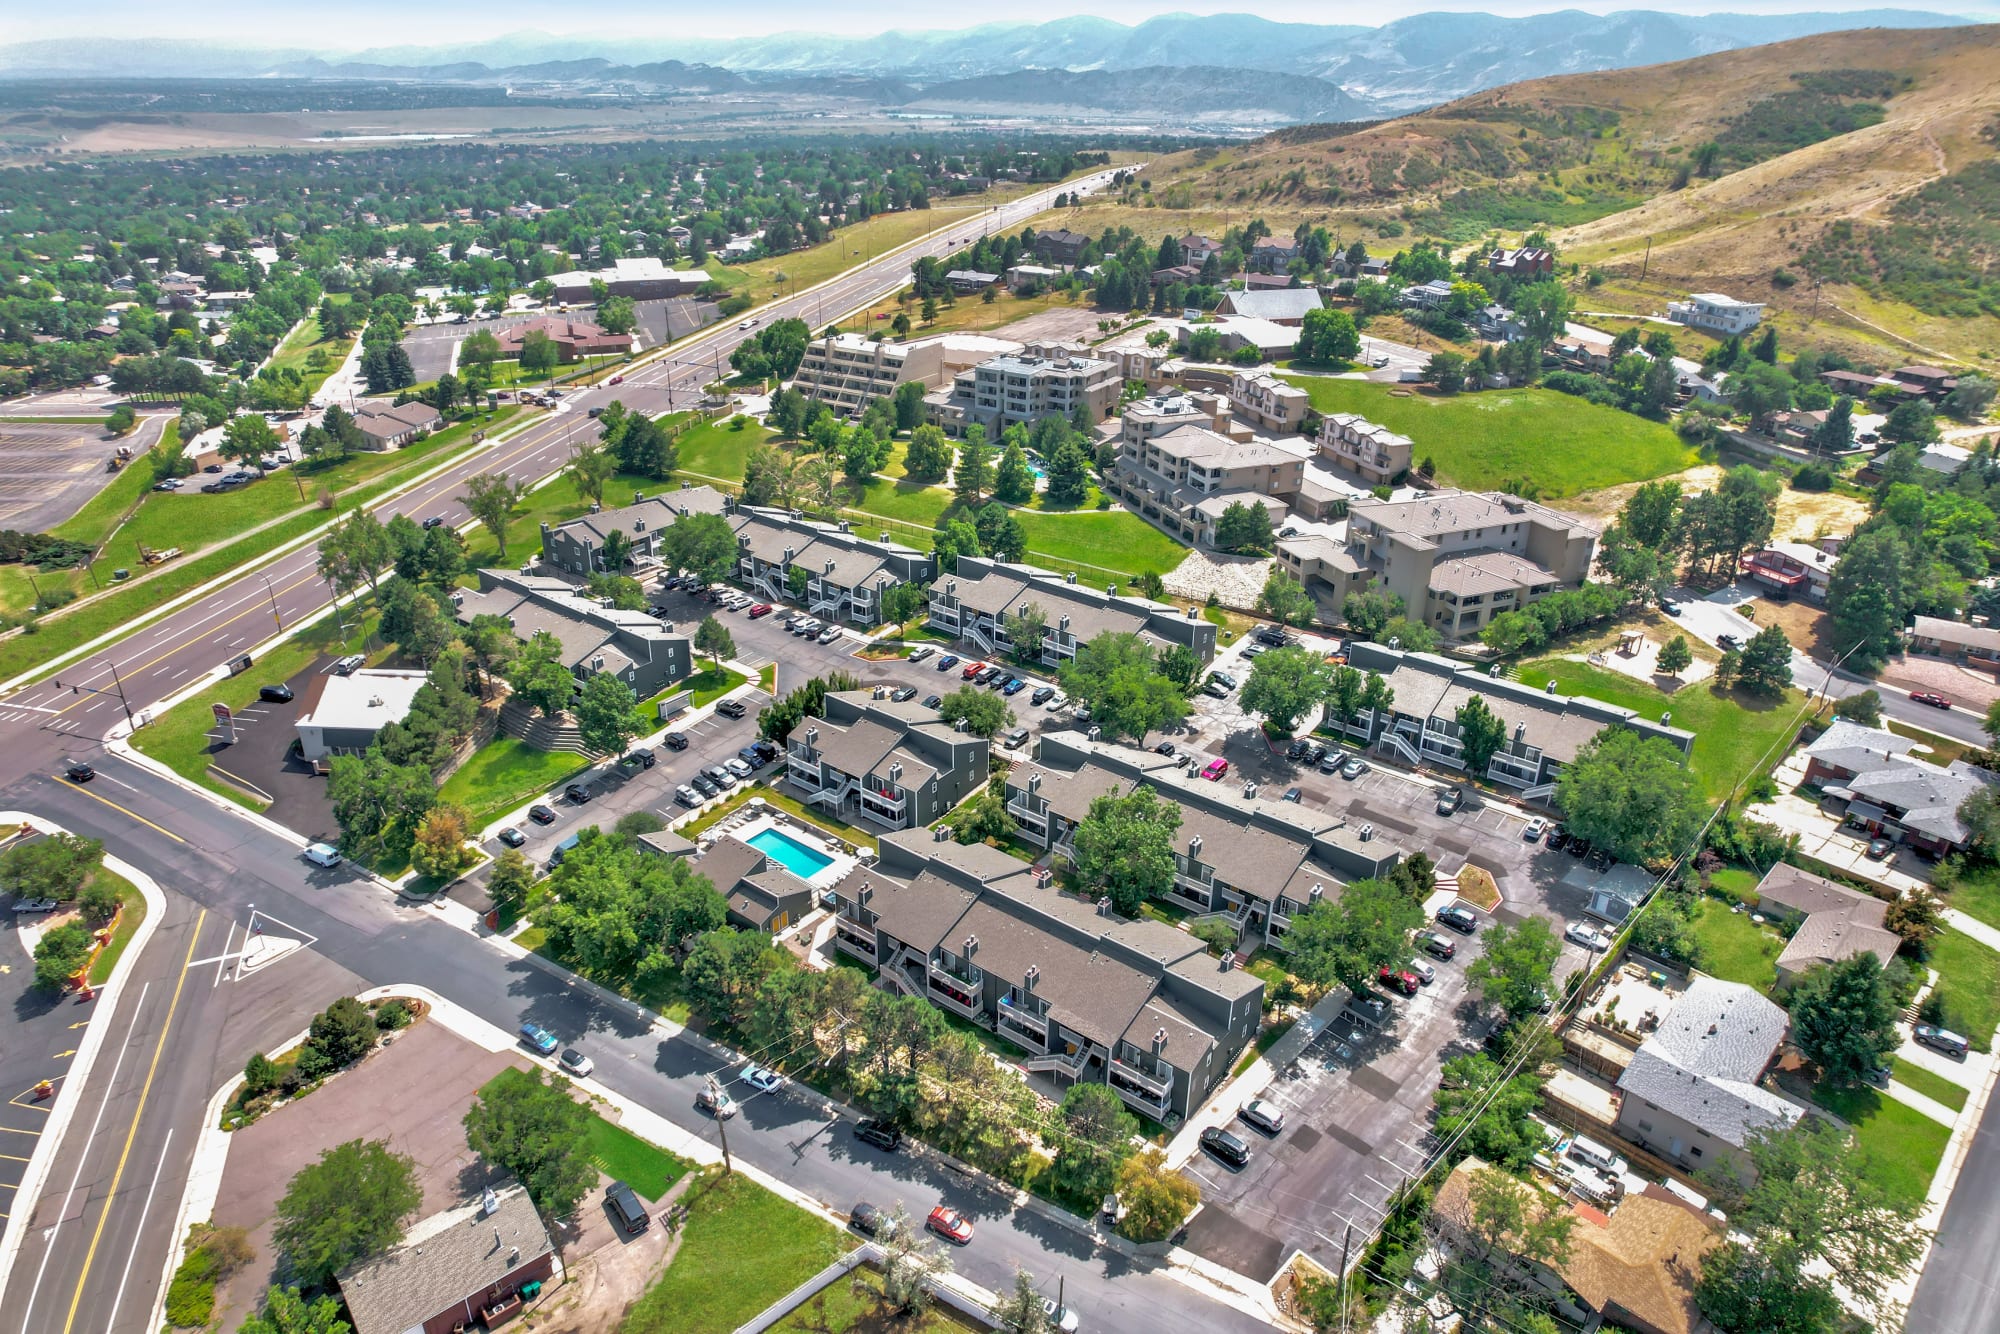 An aerial view of the property and surrounding areas at Bluesky Landing Apartments in Lakewood, Colorado